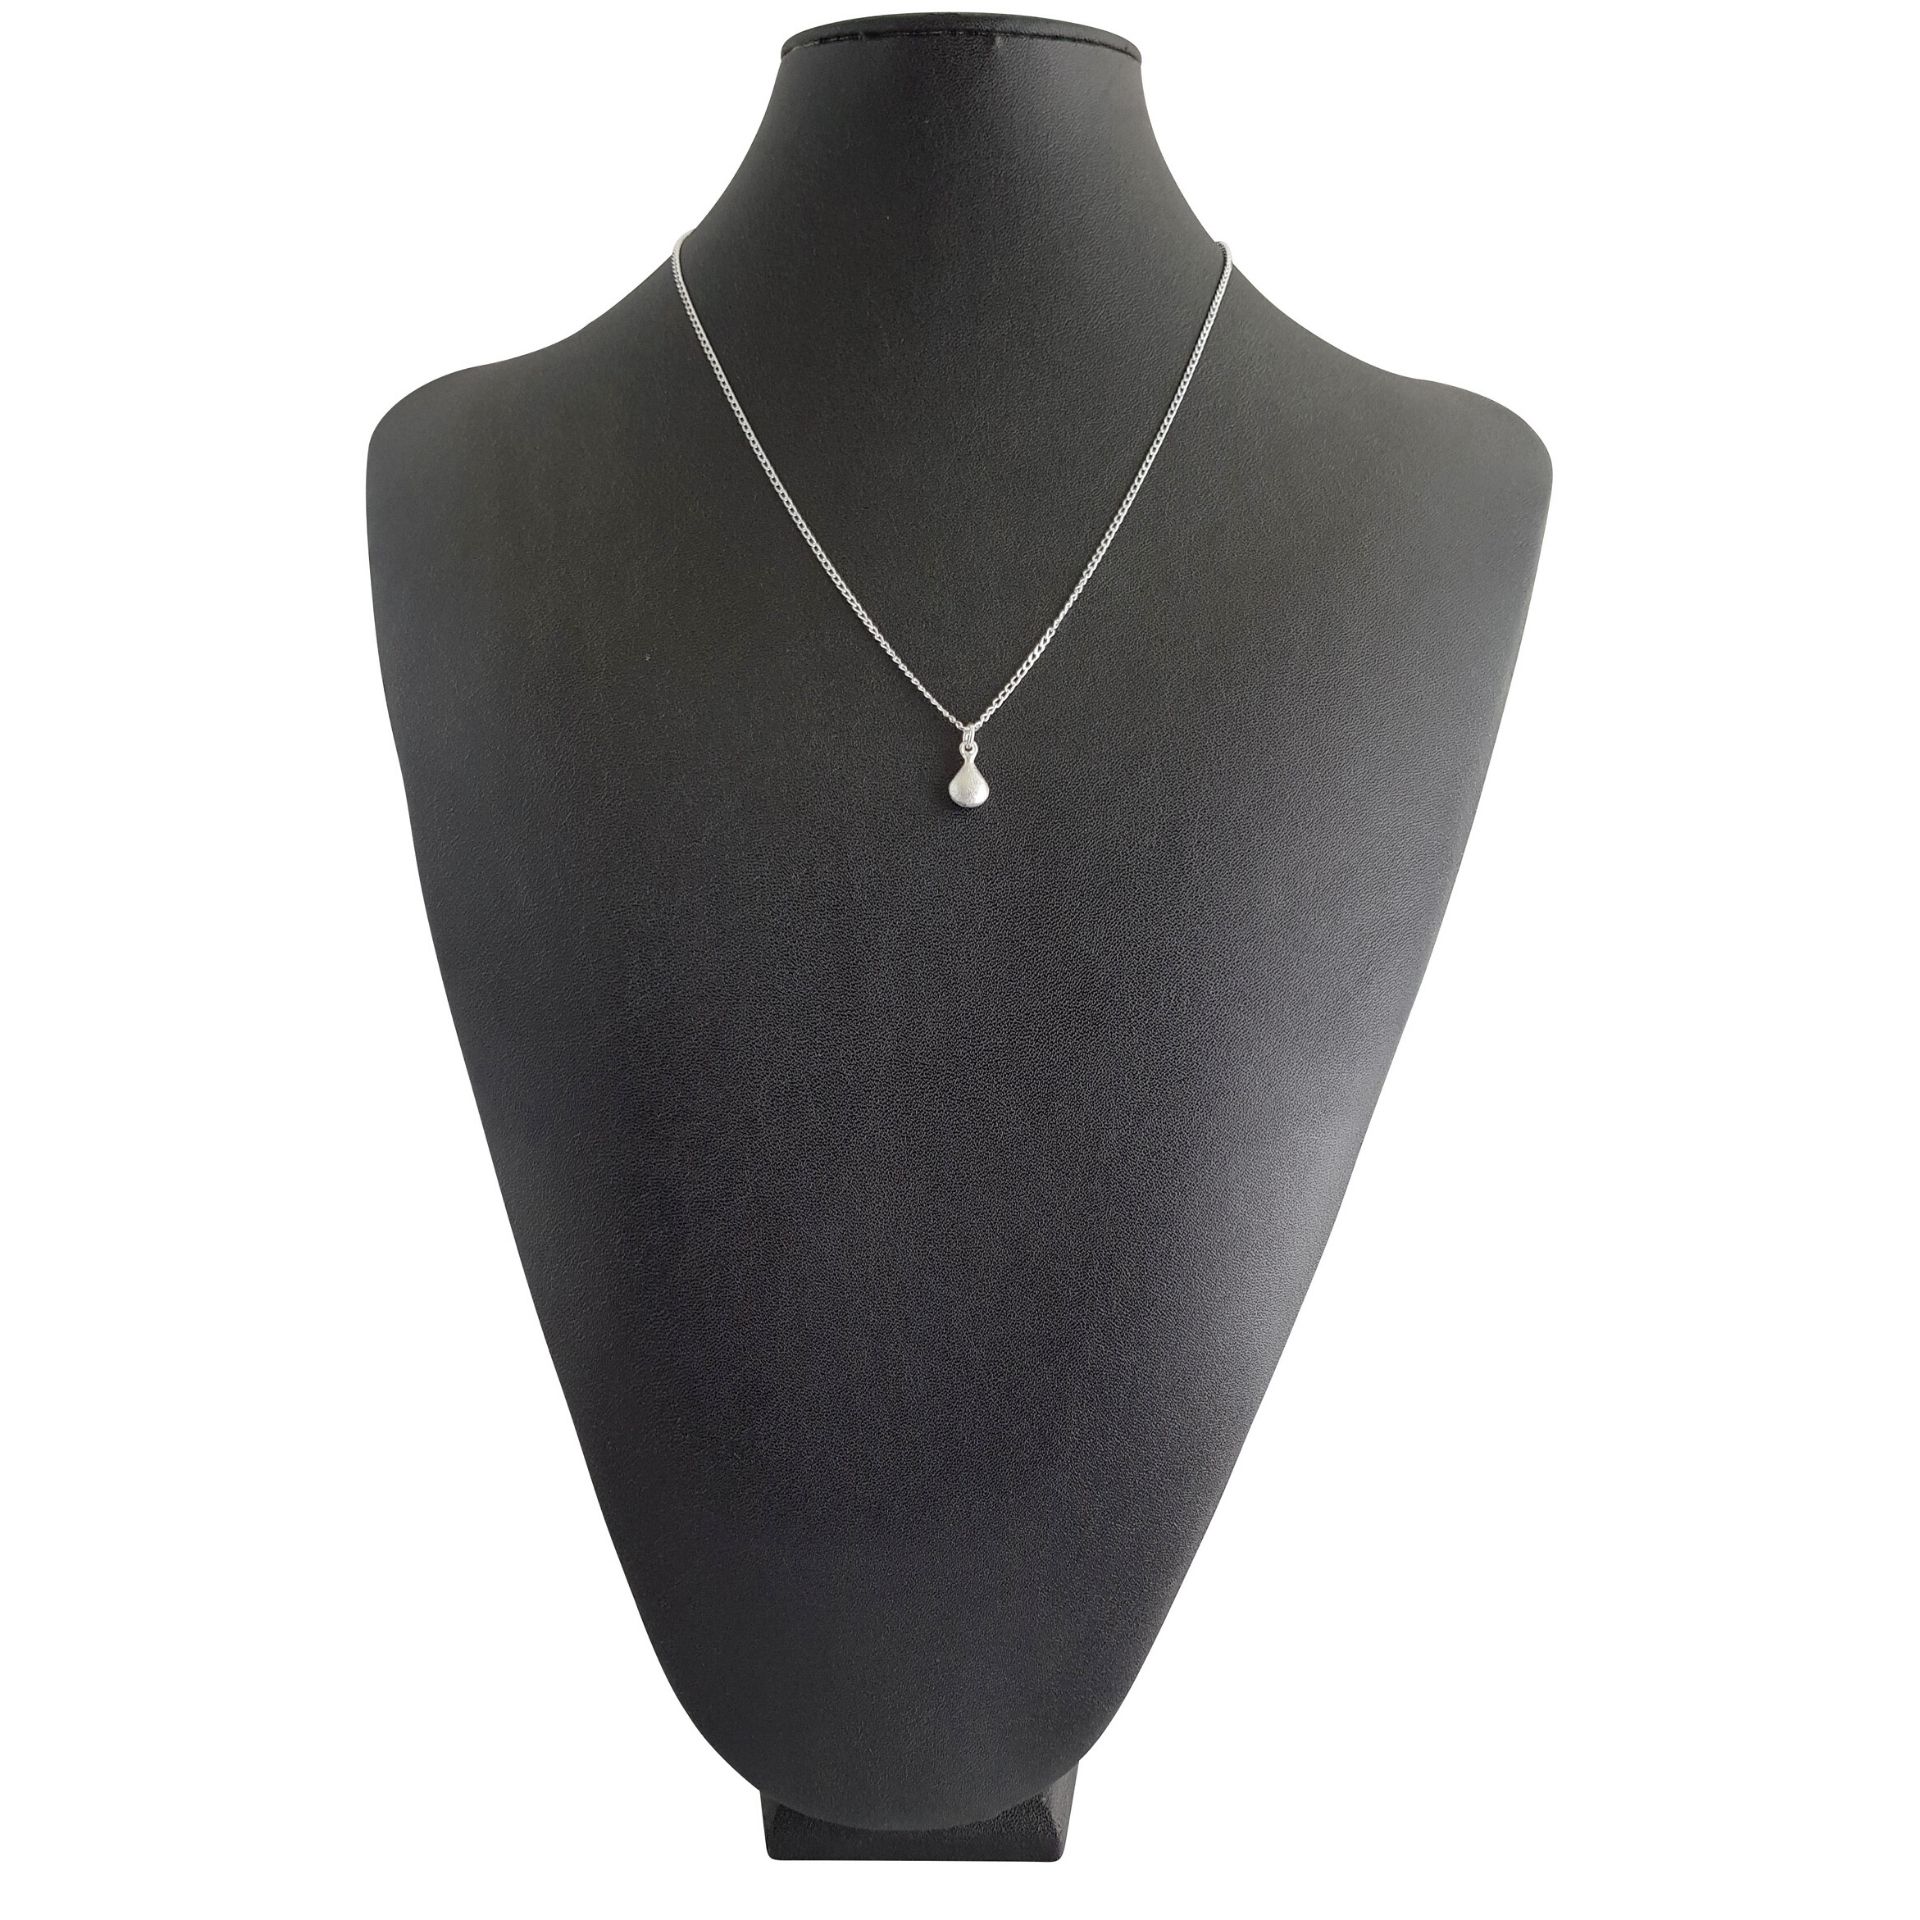 LOVEbomb Classic - Tear Drop Small Necklace - Sacred by Design